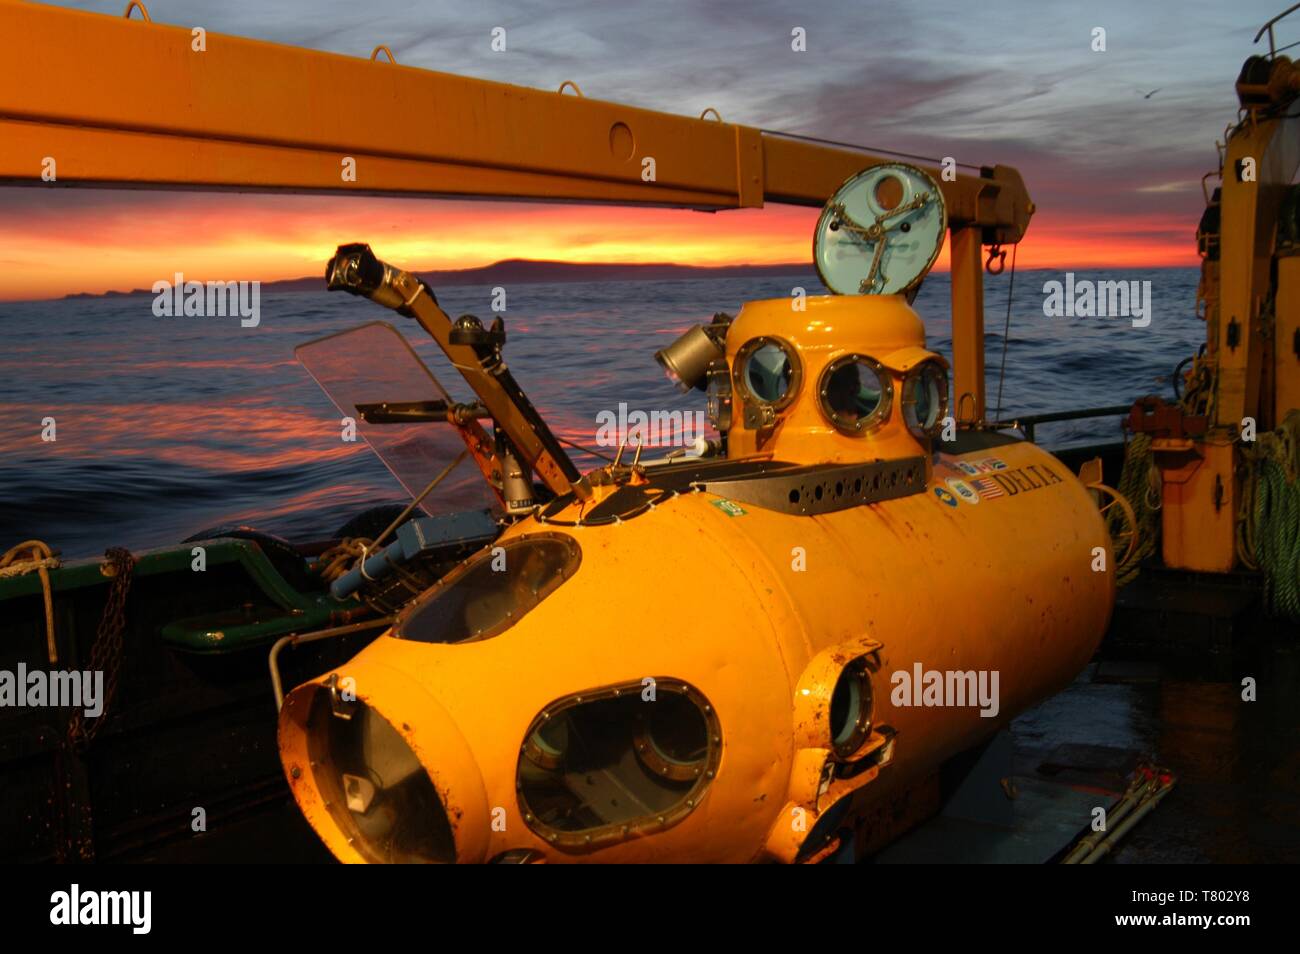 Delta Submersible Craft Stock Photo